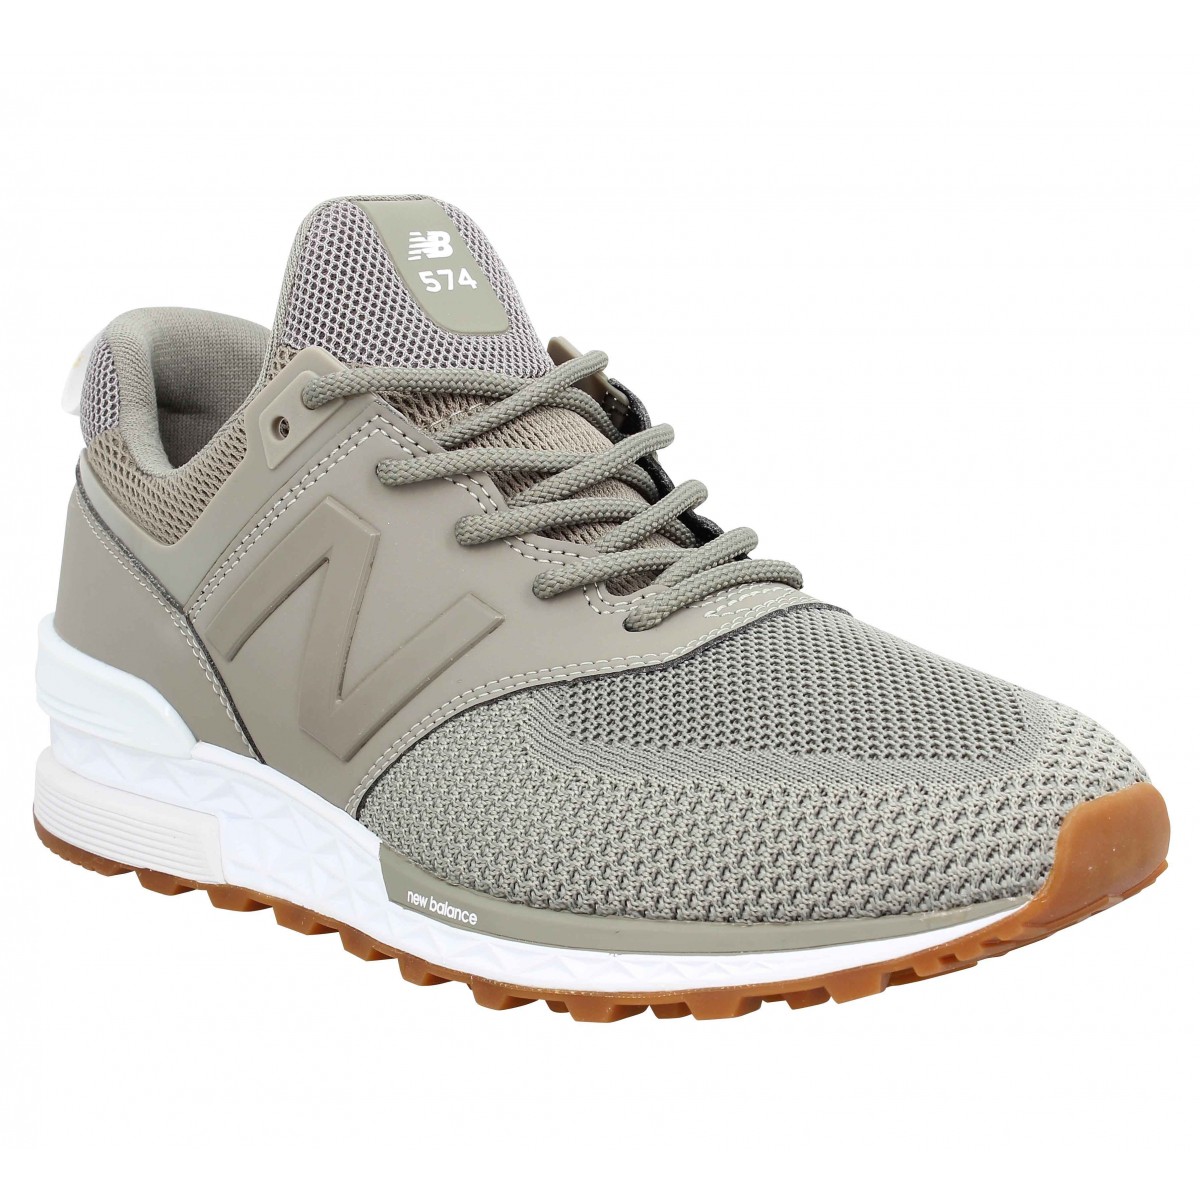 Chaussures New balance 574 sport mesh homme gris homme | Fanny ...